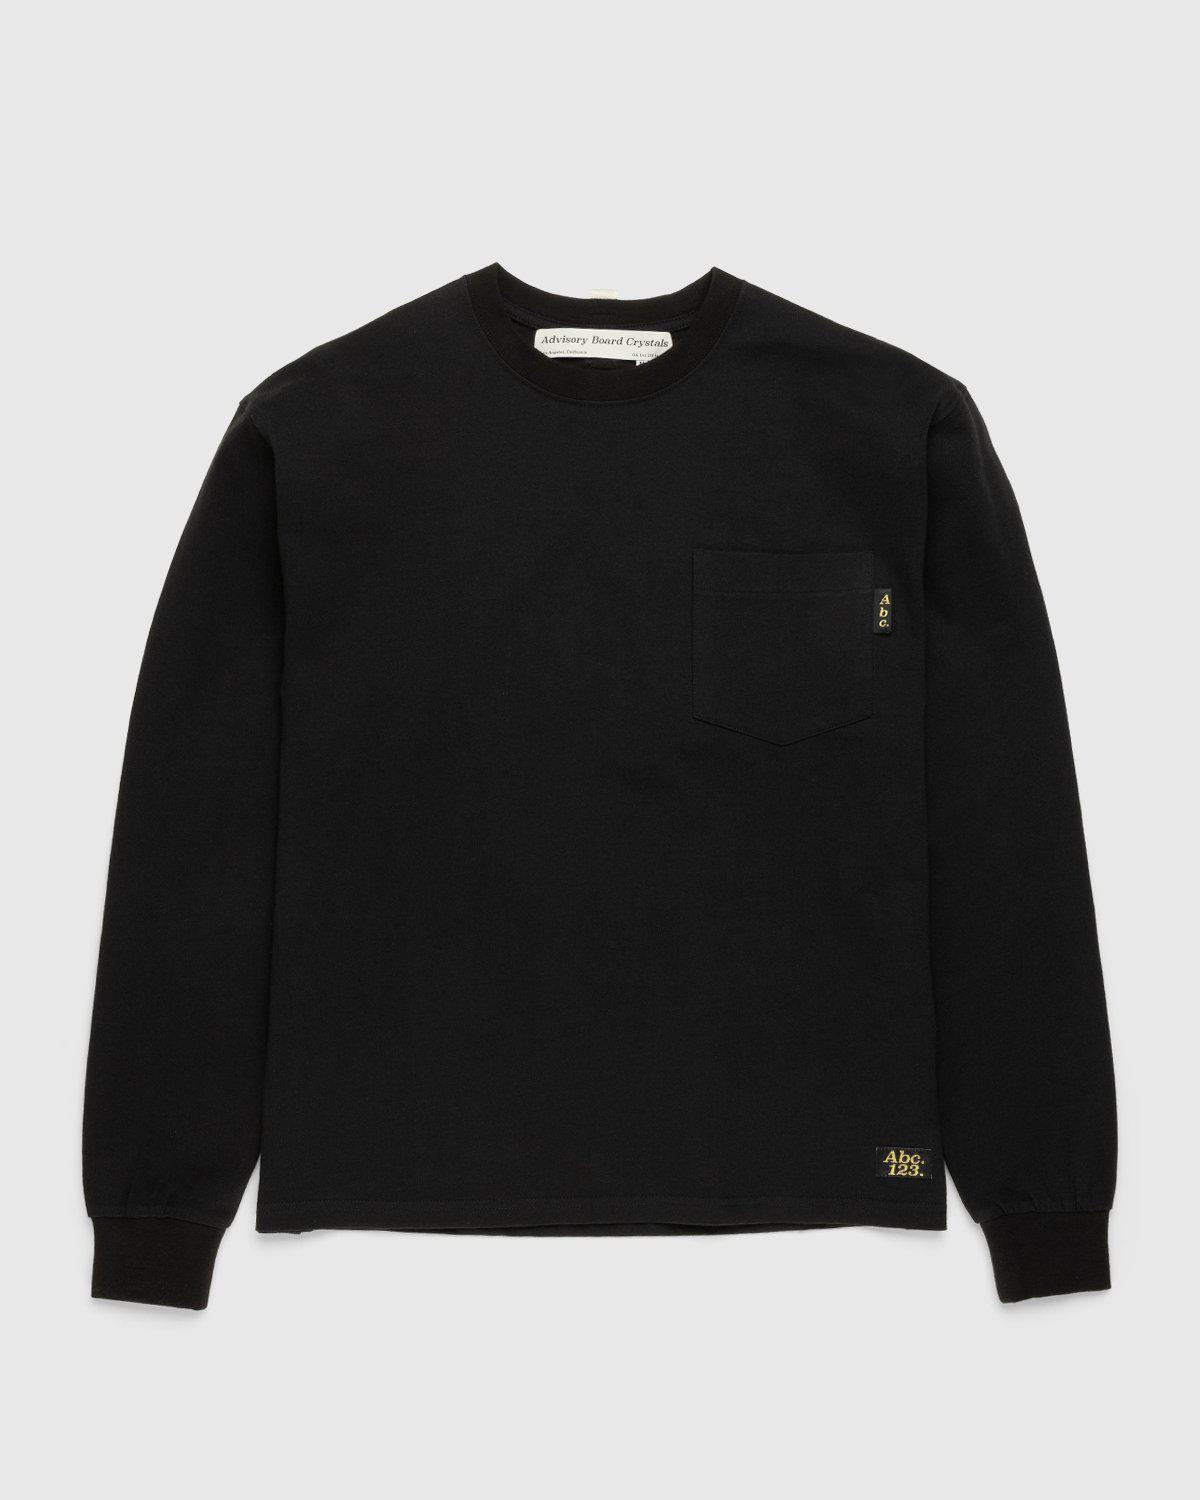 Abc. – Long Sleeve Pocket Tee Anthracite by ABC.